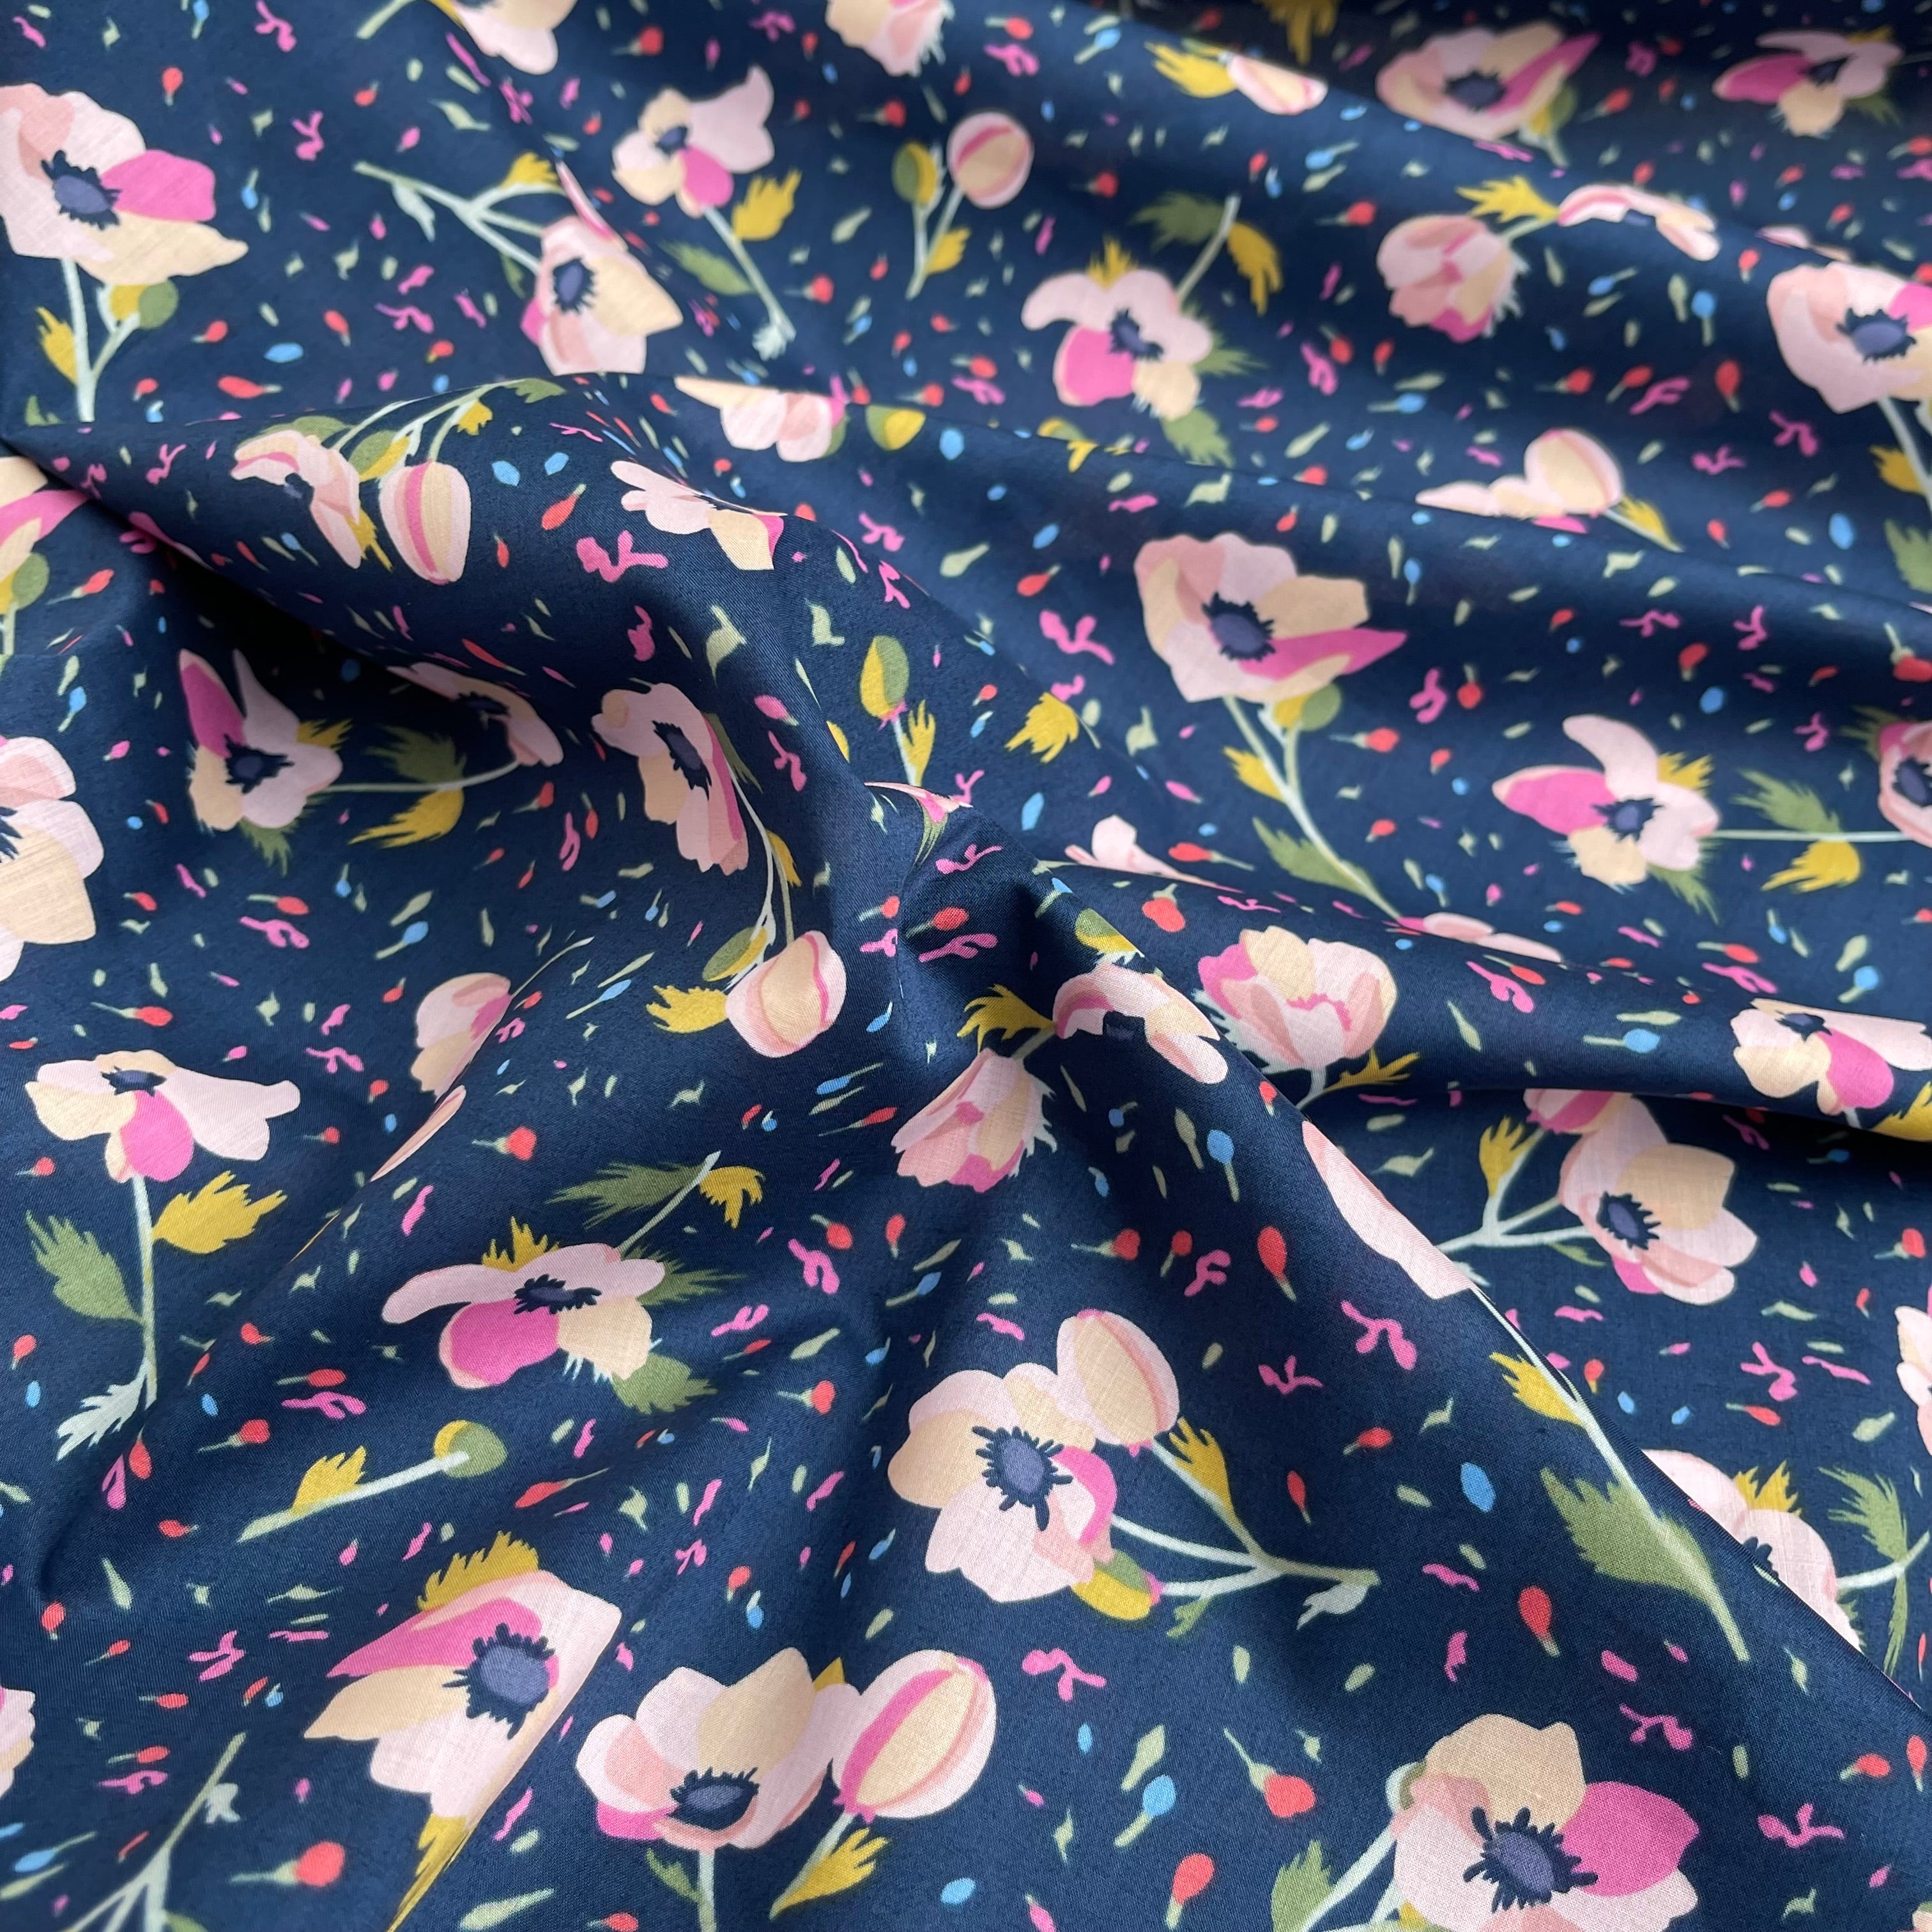 Rosa on Navy Cotton Lawn Fabric